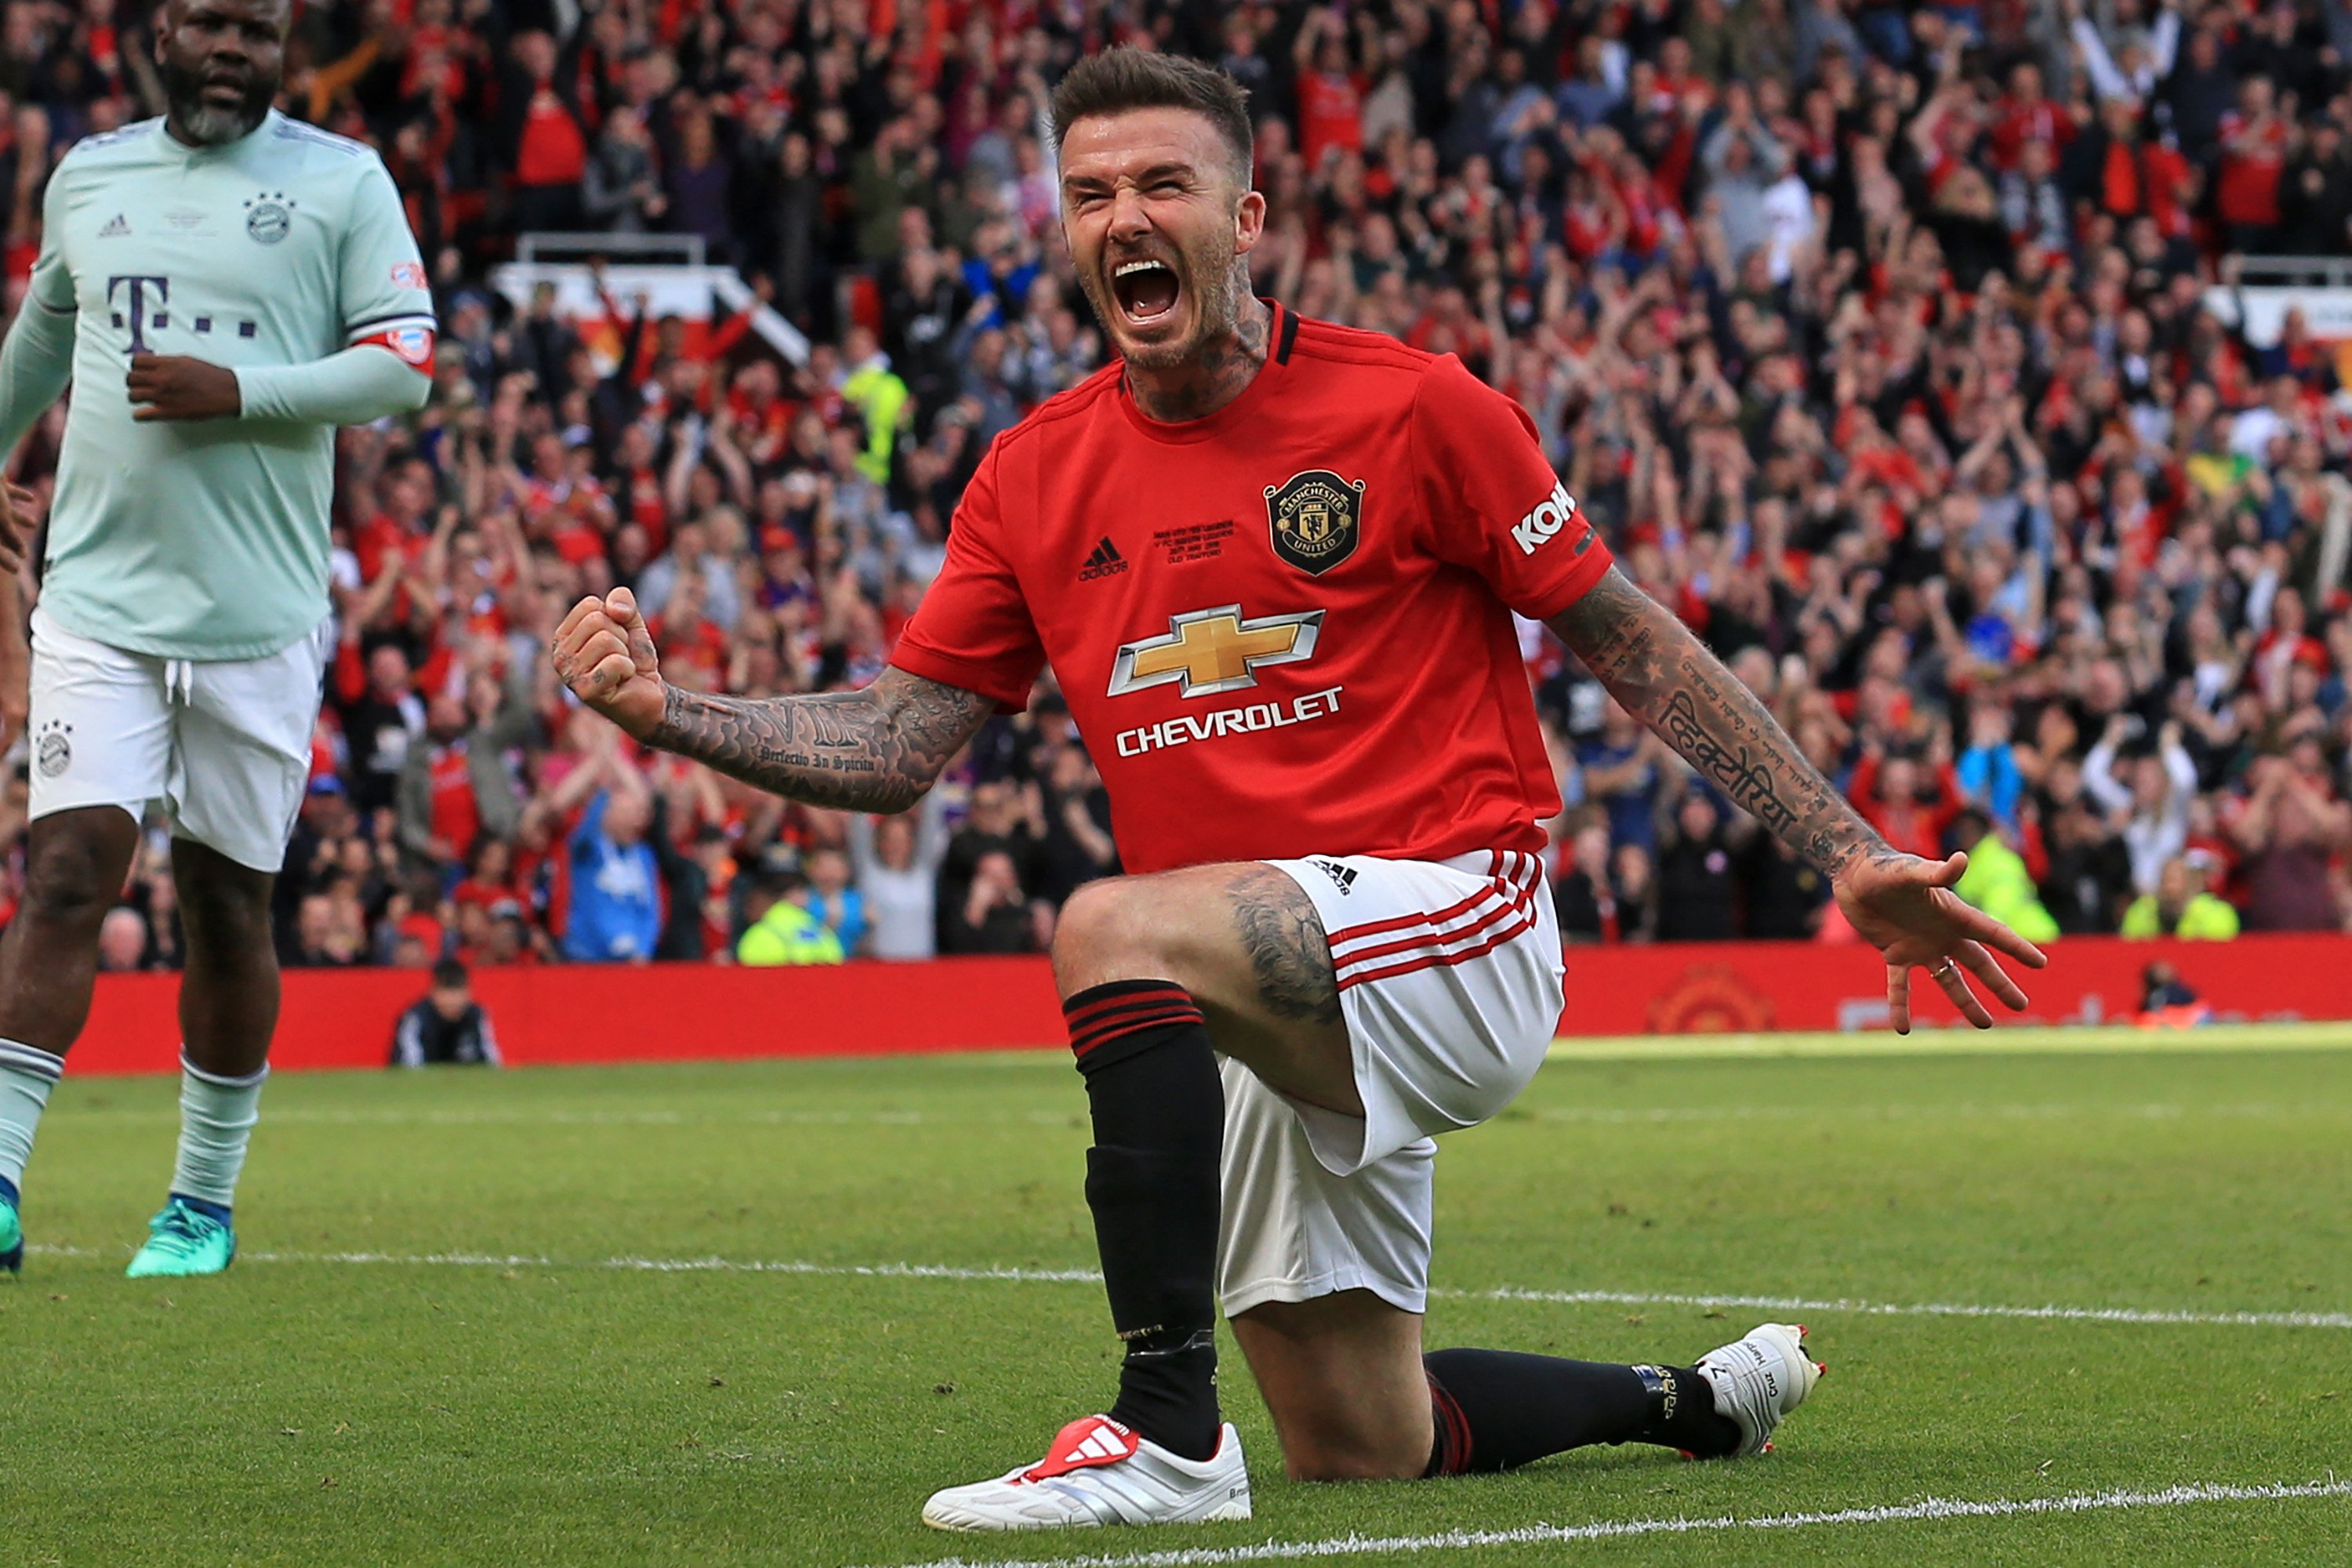 Manchester United ‘99 Legends player David Beckham celebrates after scoring their fifth goal during the Treble Reunion 20th anniversary football match between Manchester United ‘99 Legends and FC Bayern Legends at Old Trafford in Manchester, north-west England on May 26, 2019. Photo: AFP